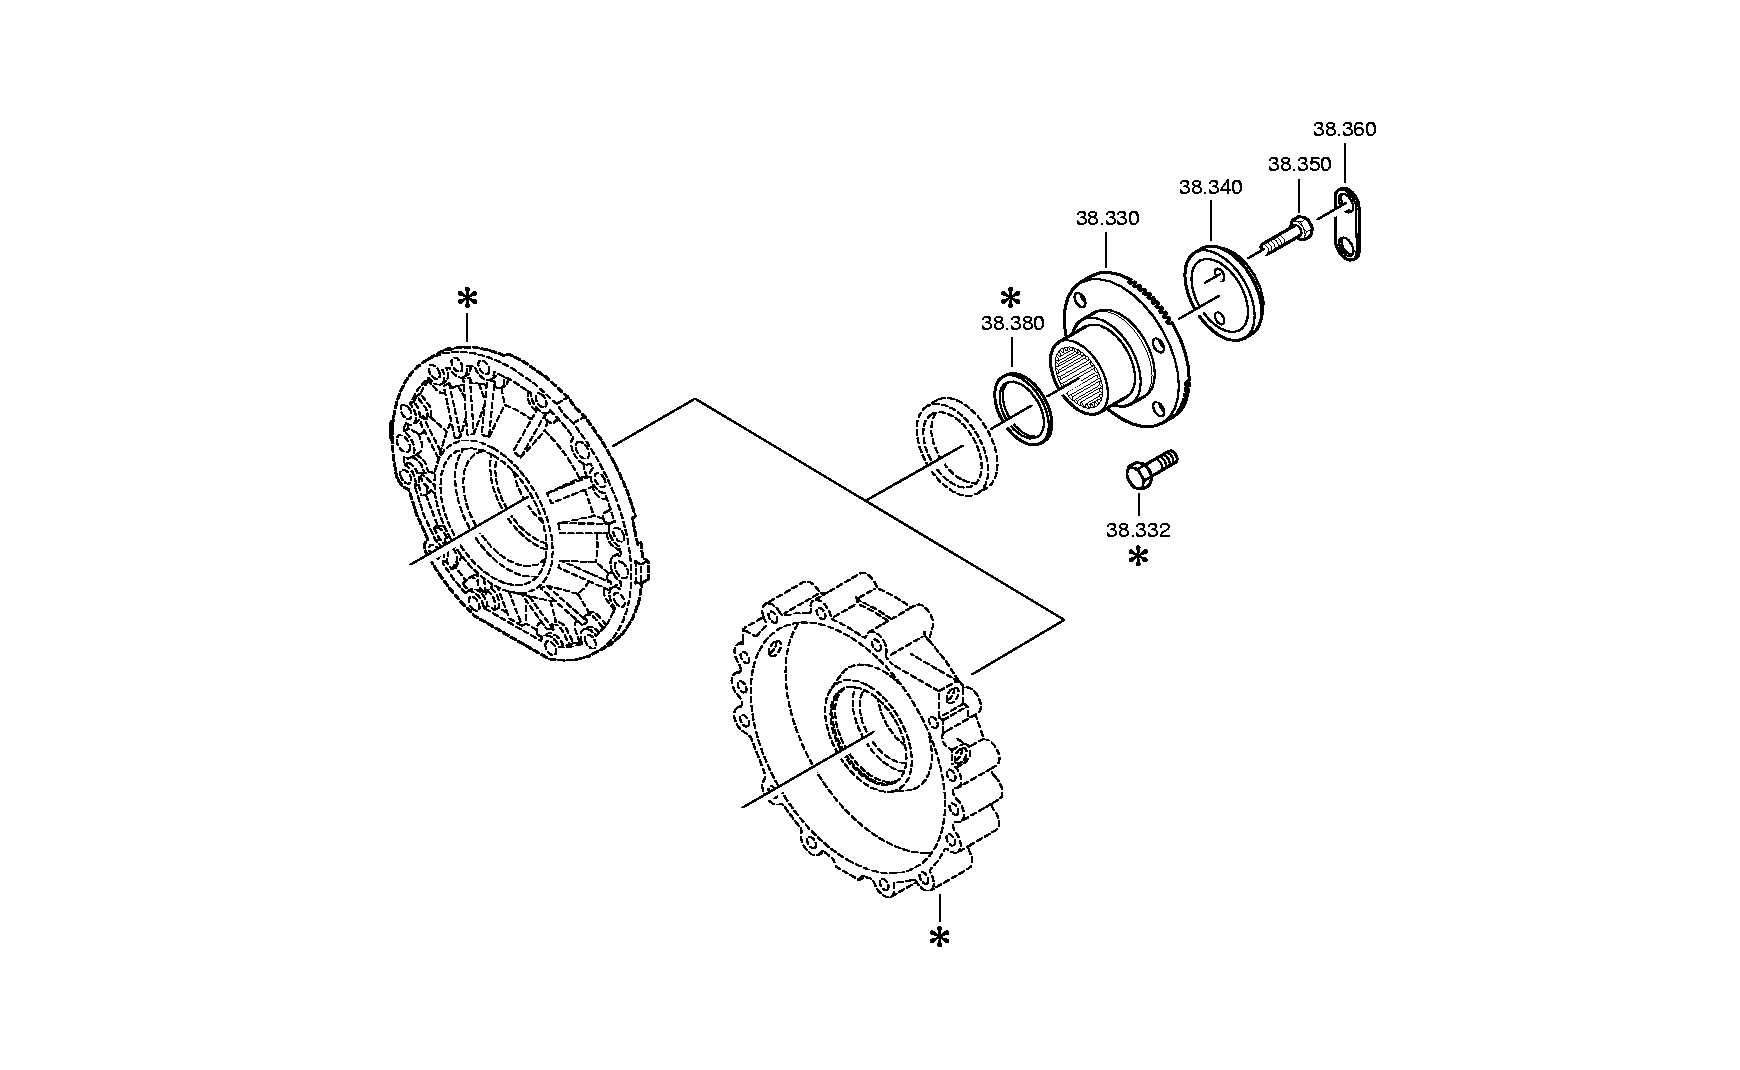 drawing for IVECO 585339 - GEAR SHIFT FORK (figure 2)